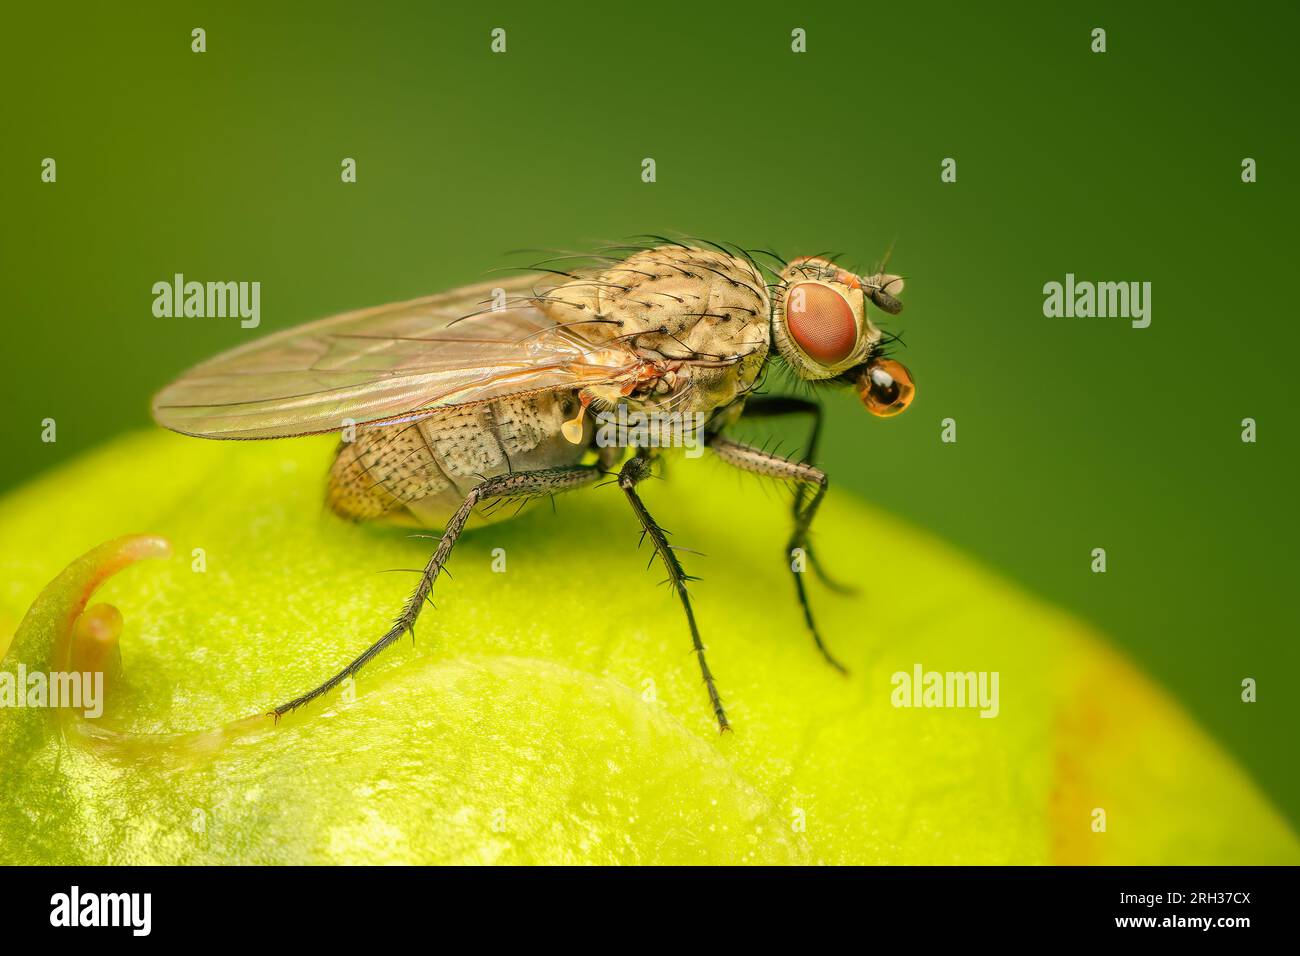 Fly making bubbles to cool down with blurred background and copy space Stock Photo